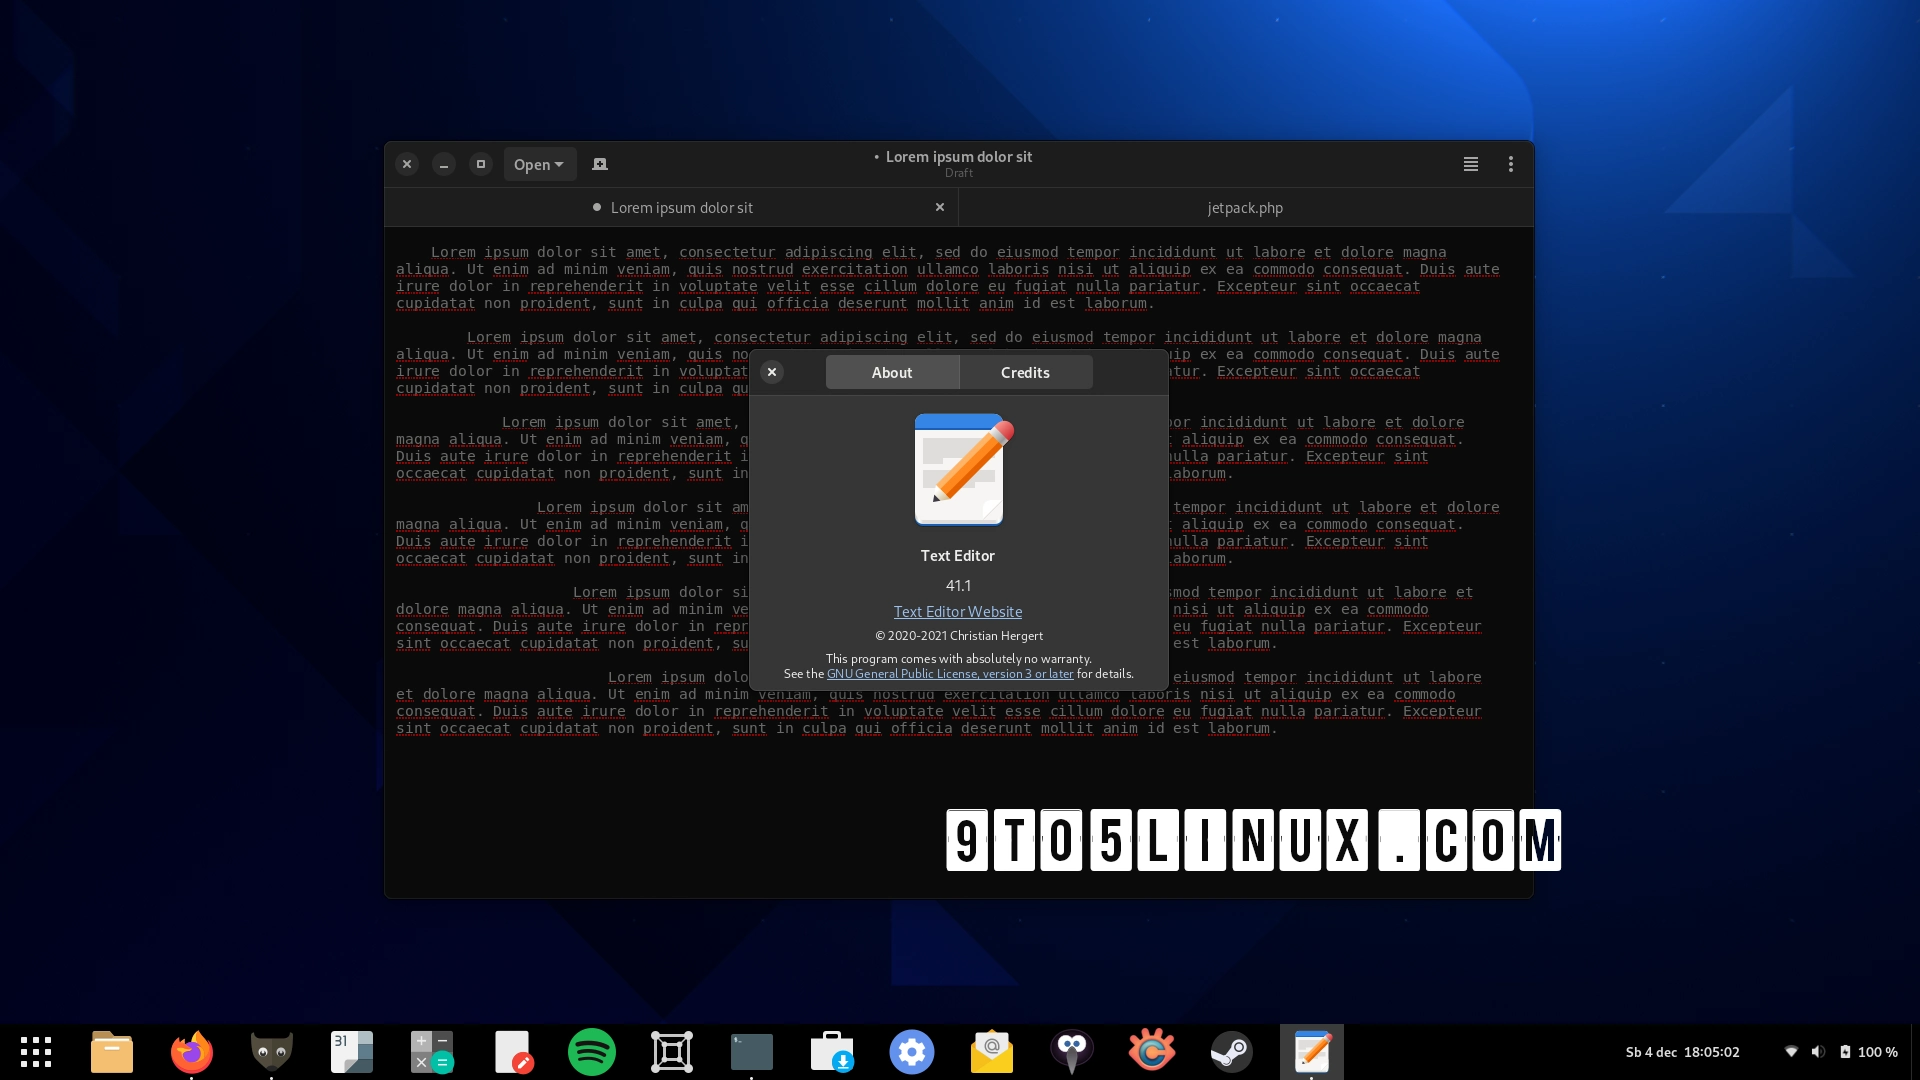 GNOME’s Text Editor to Get Recoloring Support, Revamped “Open” Popover in GNOME 42